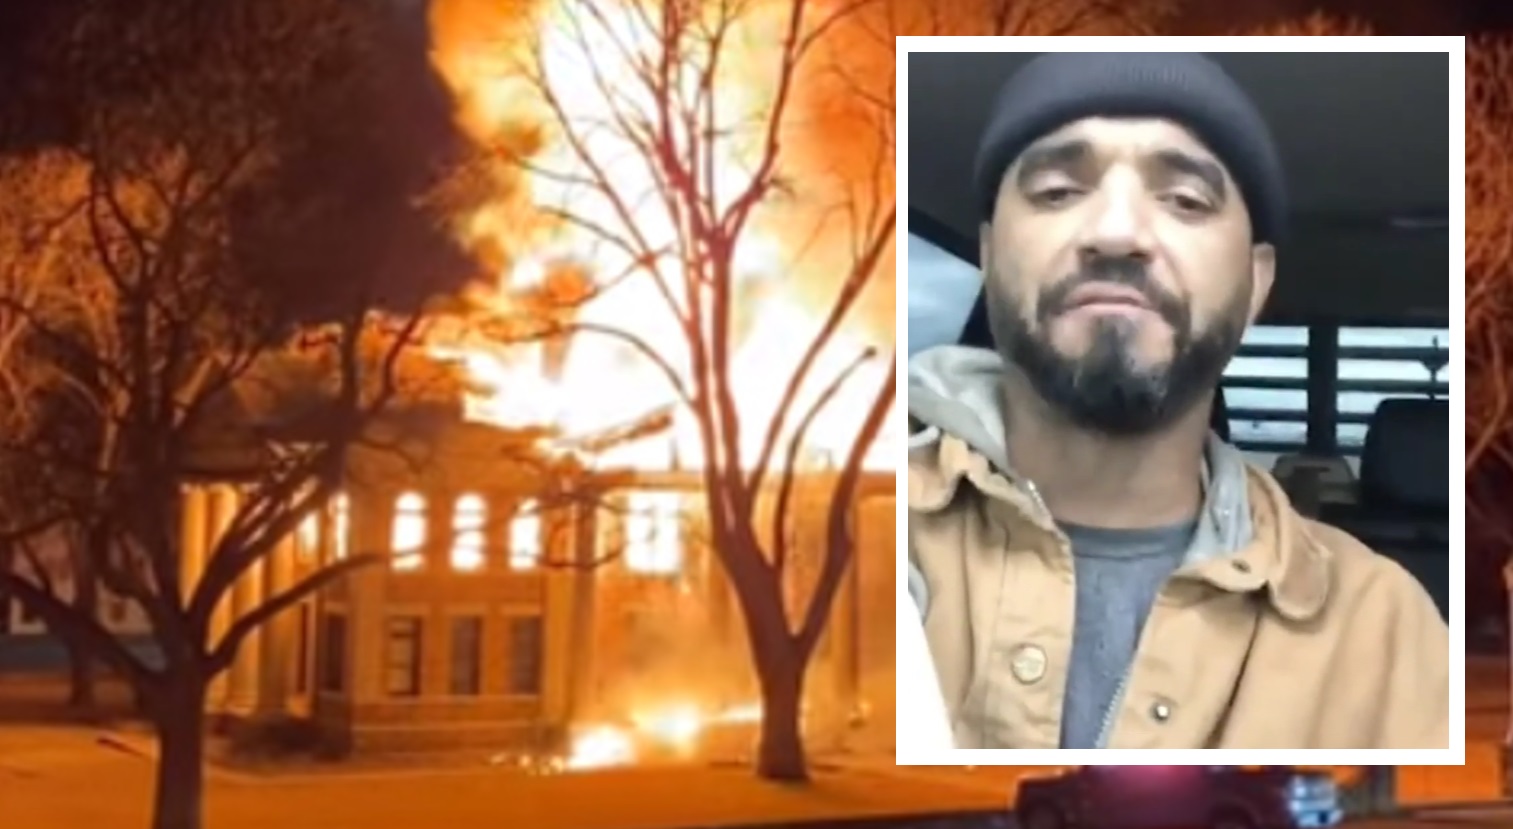 Man Who Is A Suspect in Mason County Courthouse Fire Goes Live and Streams Police Pursuit